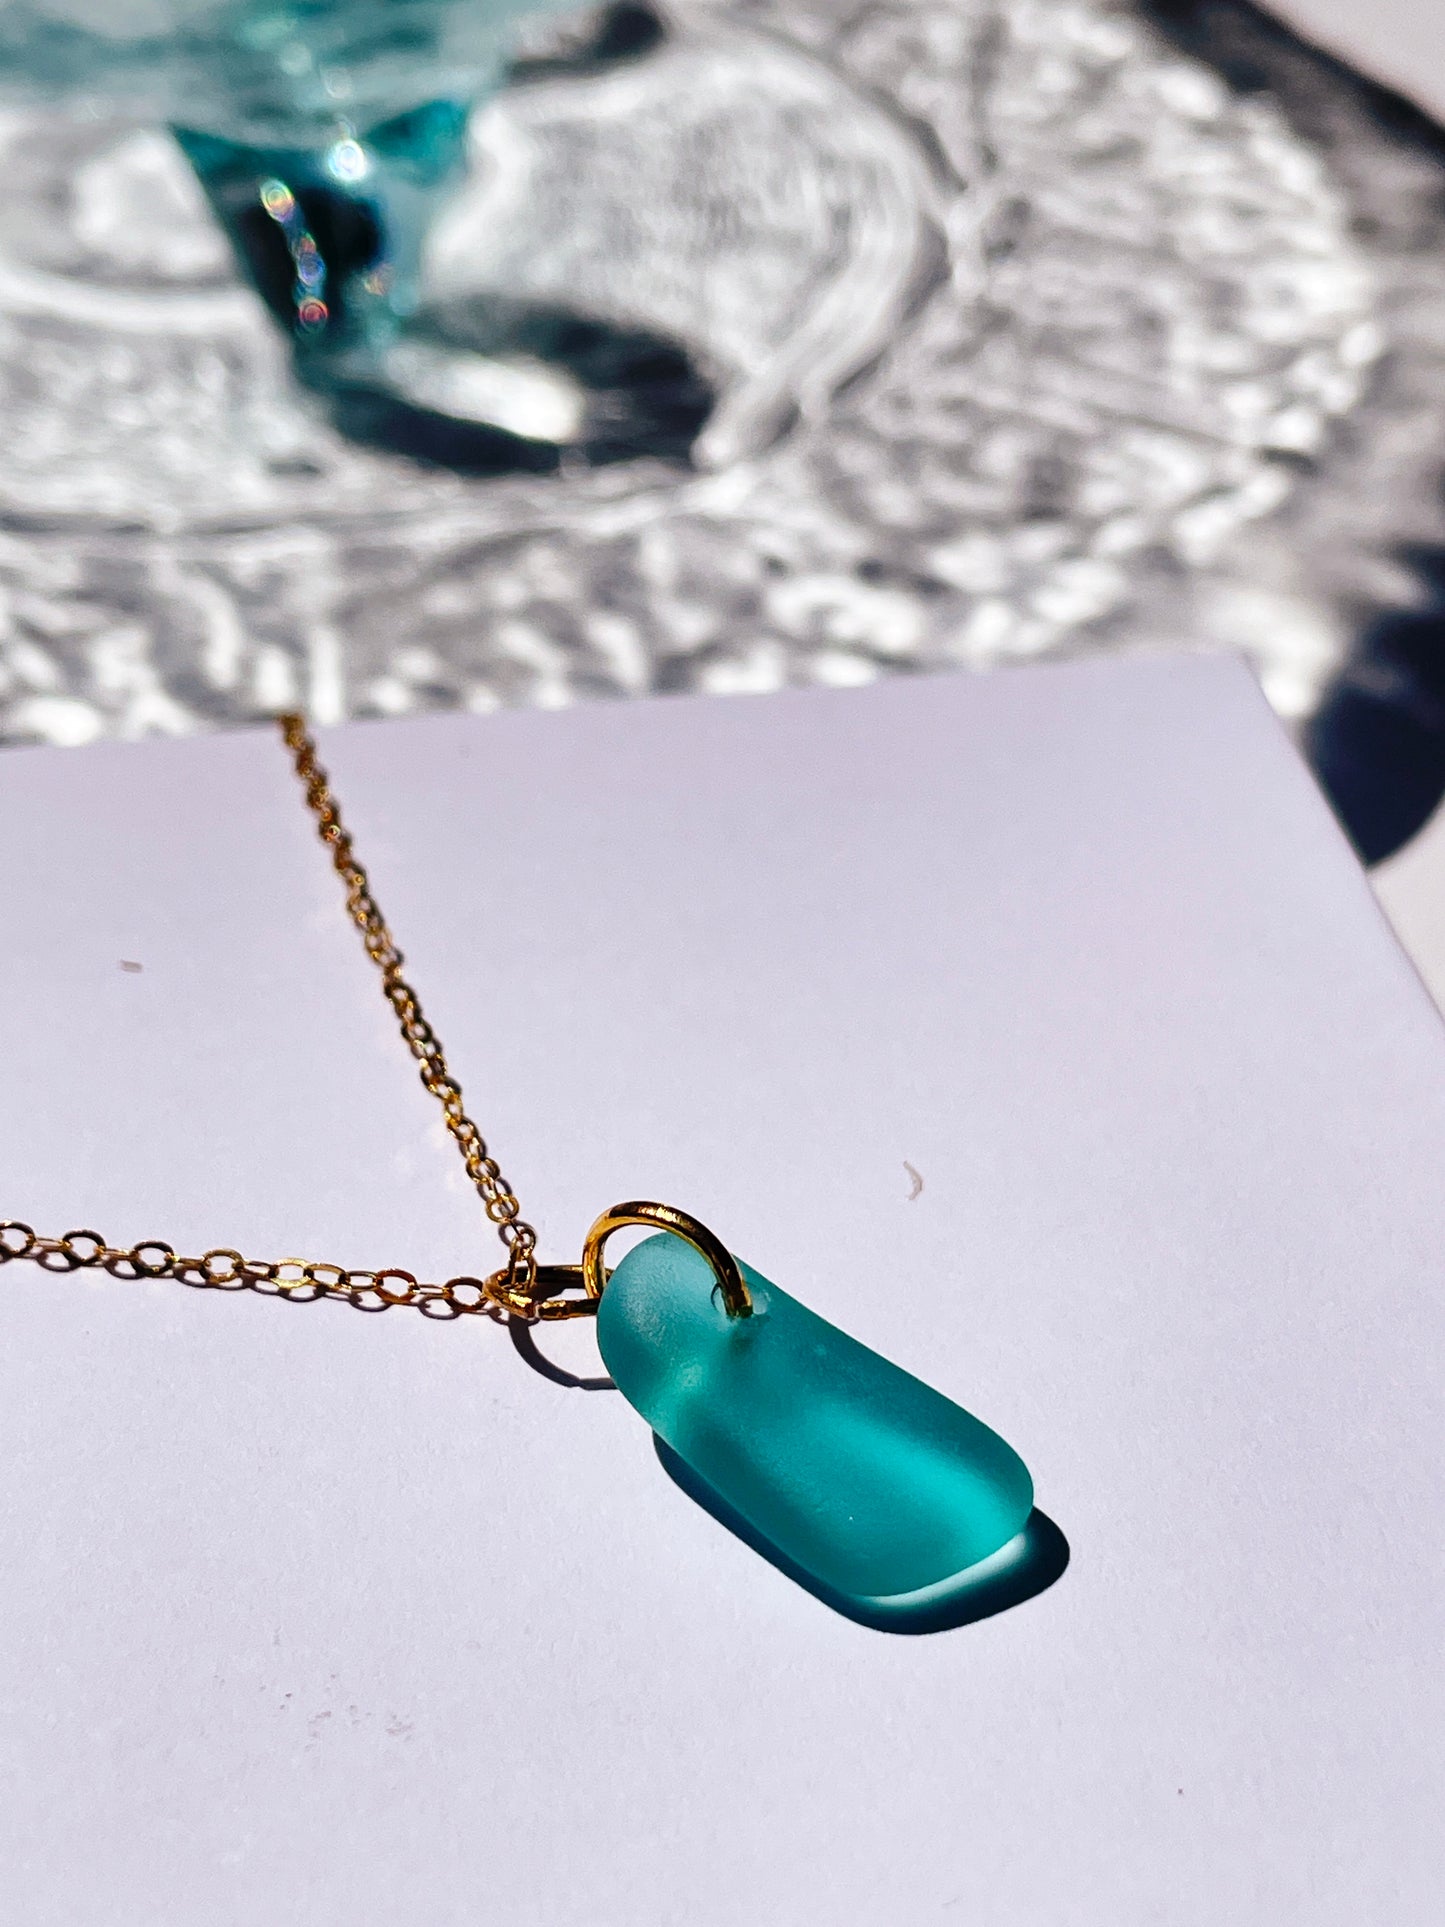 Authentic Teal Sea-Glass Pendant Necklace with 14k Gold Filled Chain | Handmade and Unique